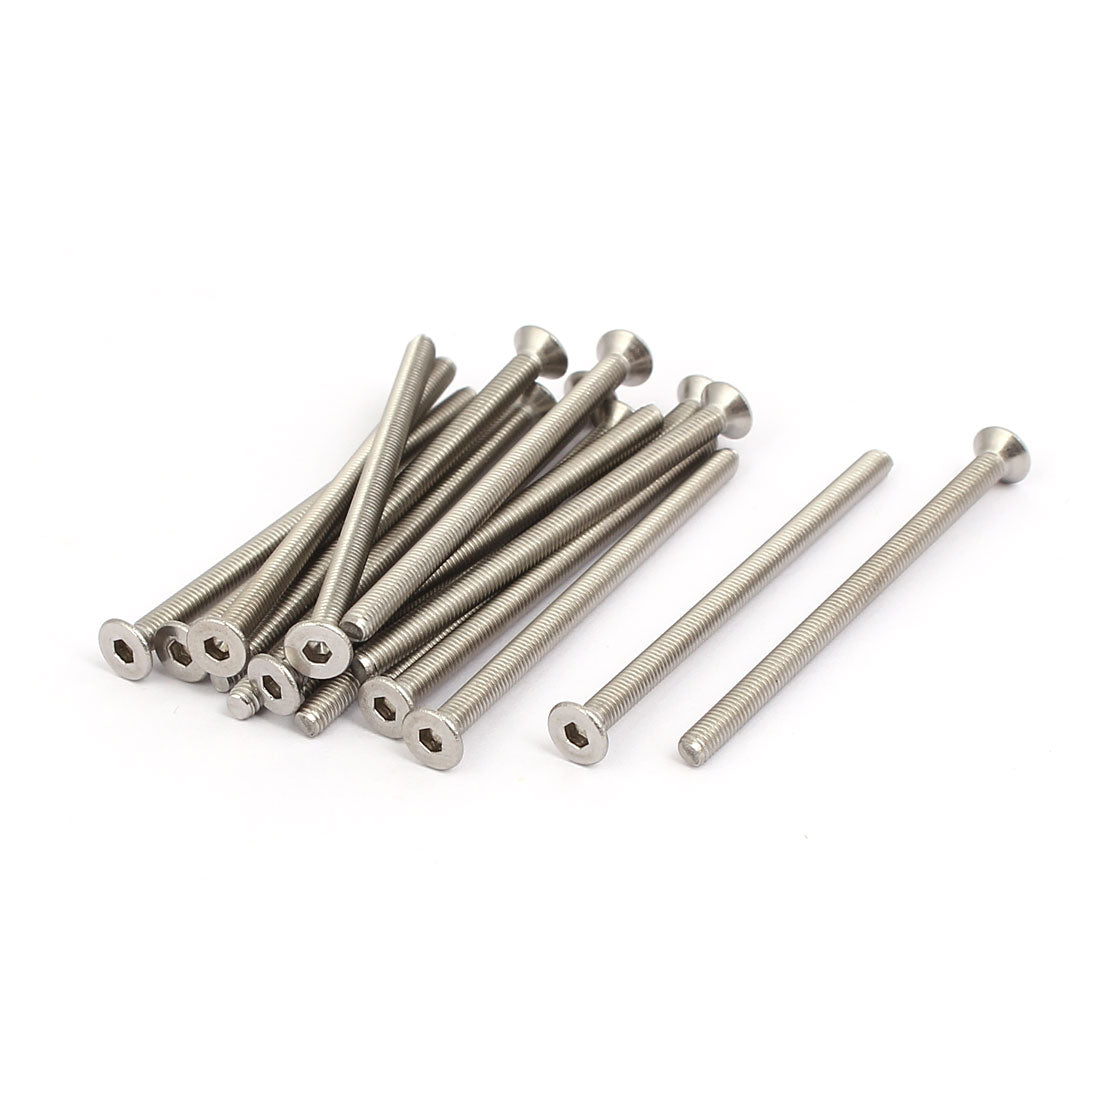 uxcell Uxcell M3x50mm 316 Stainless Steel Flat Head Hex Socket Cap Screws Silver Tone 15pcs